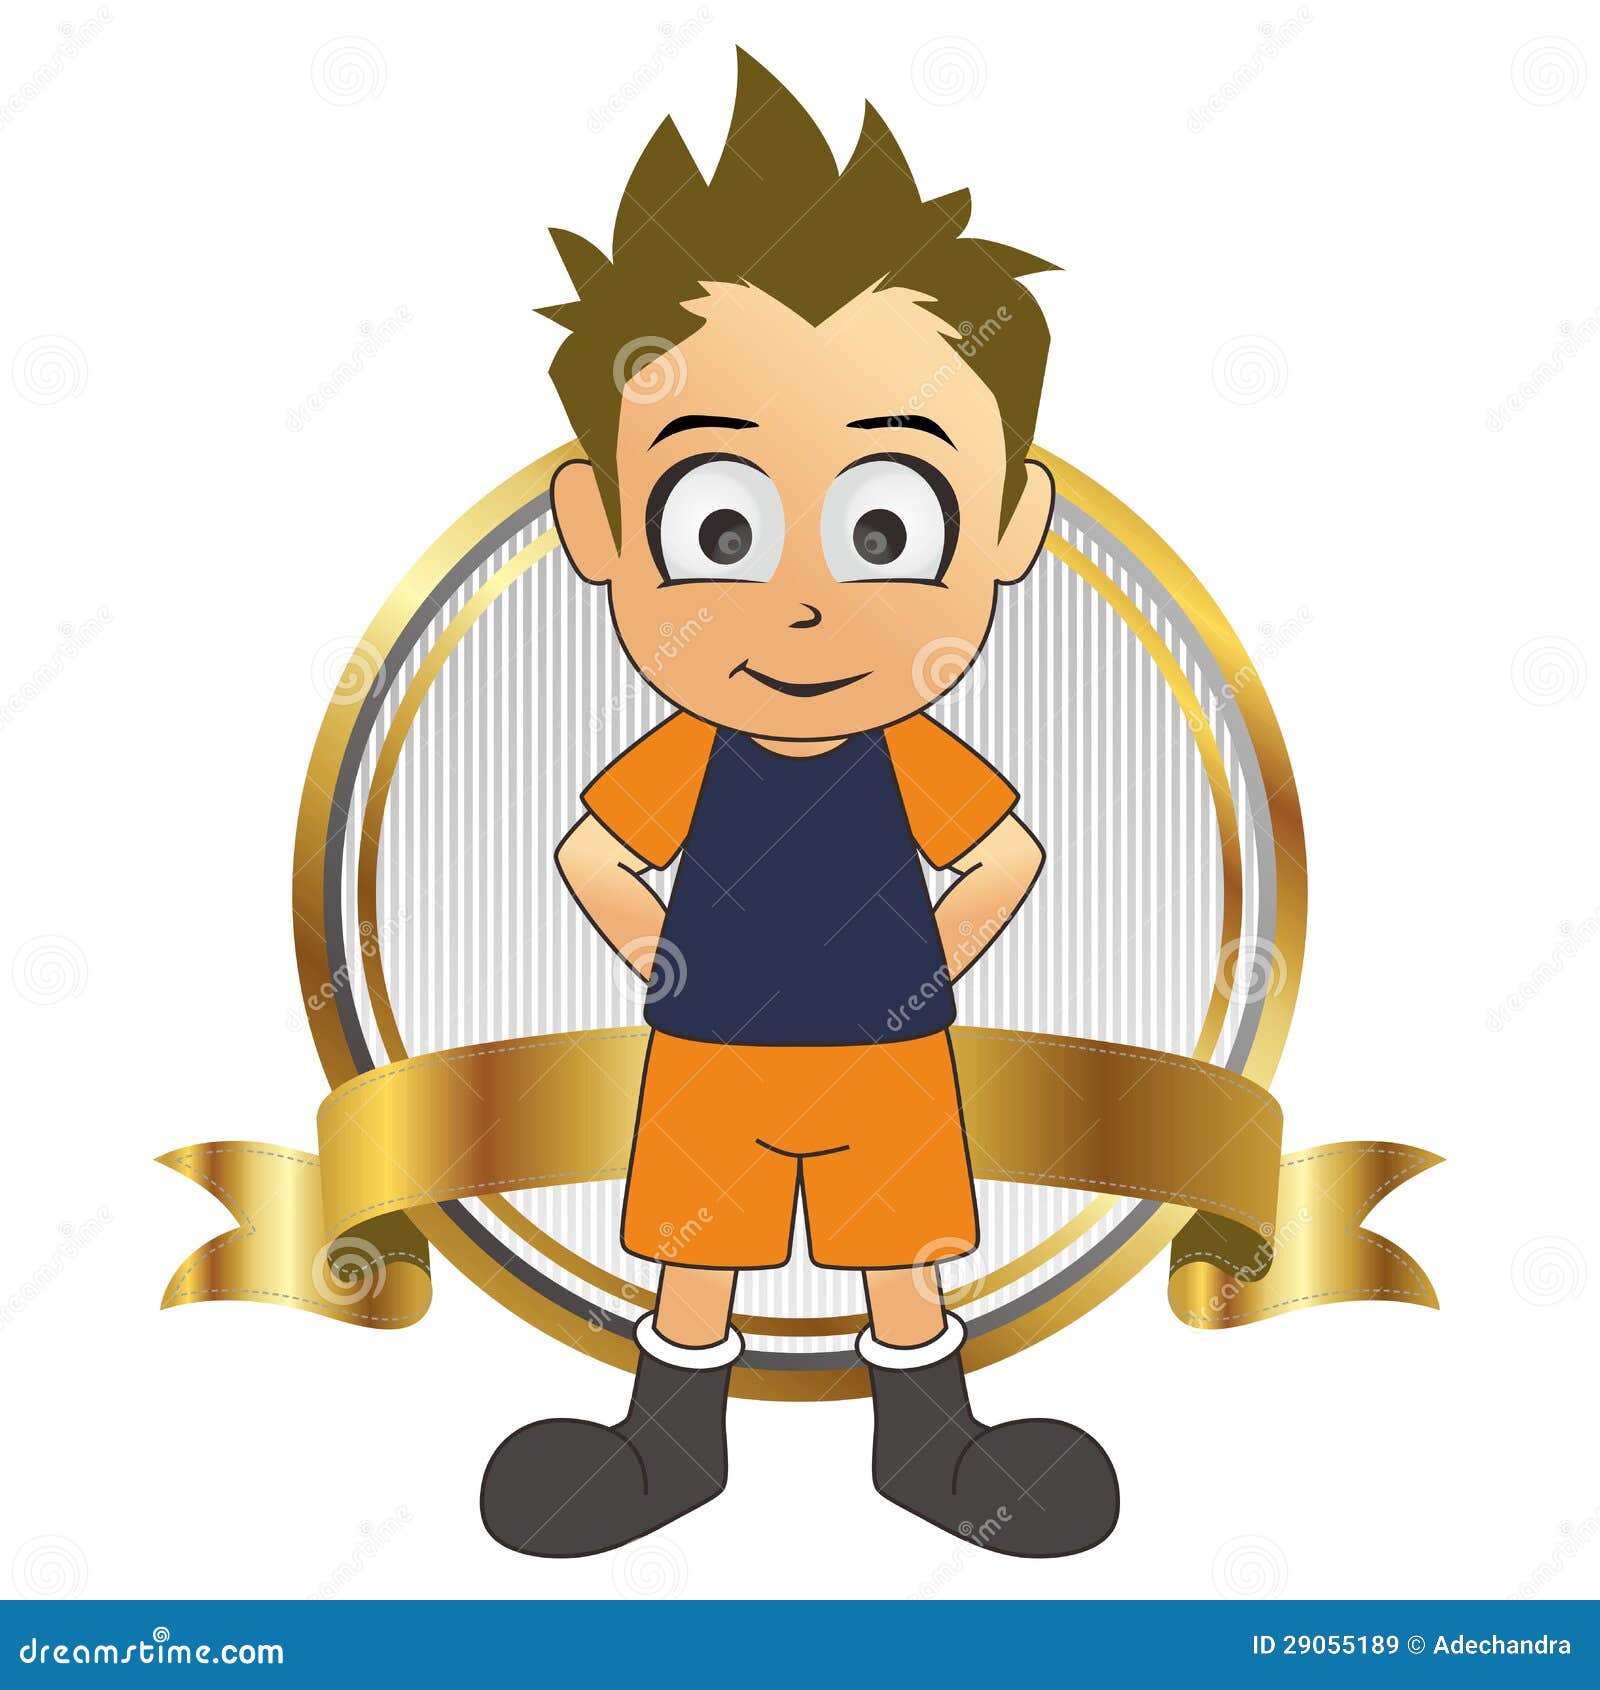 Soccer Man Cartoon Label Gold Stand Spike Hair Royalty Free Stock Images - Image: 29055189